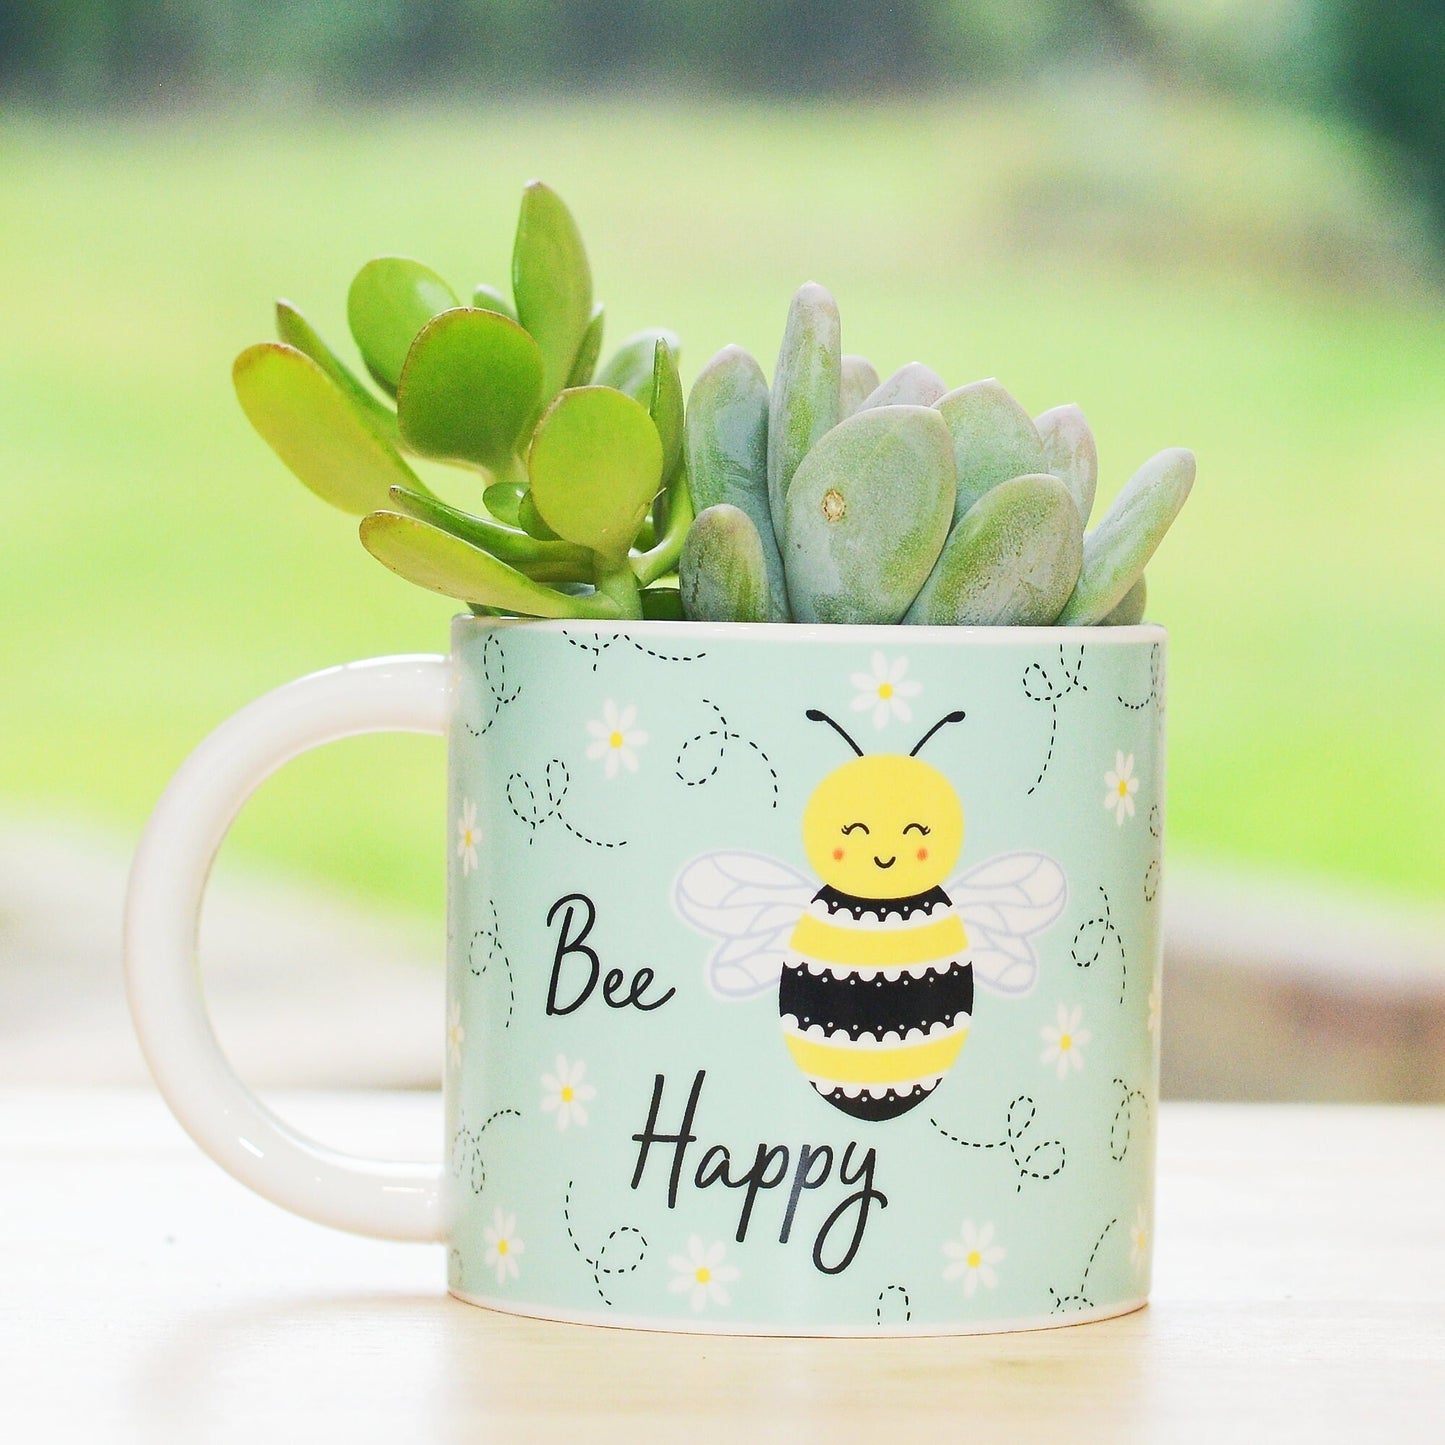 Bee Happy Mug Planter With Choices Of Plants